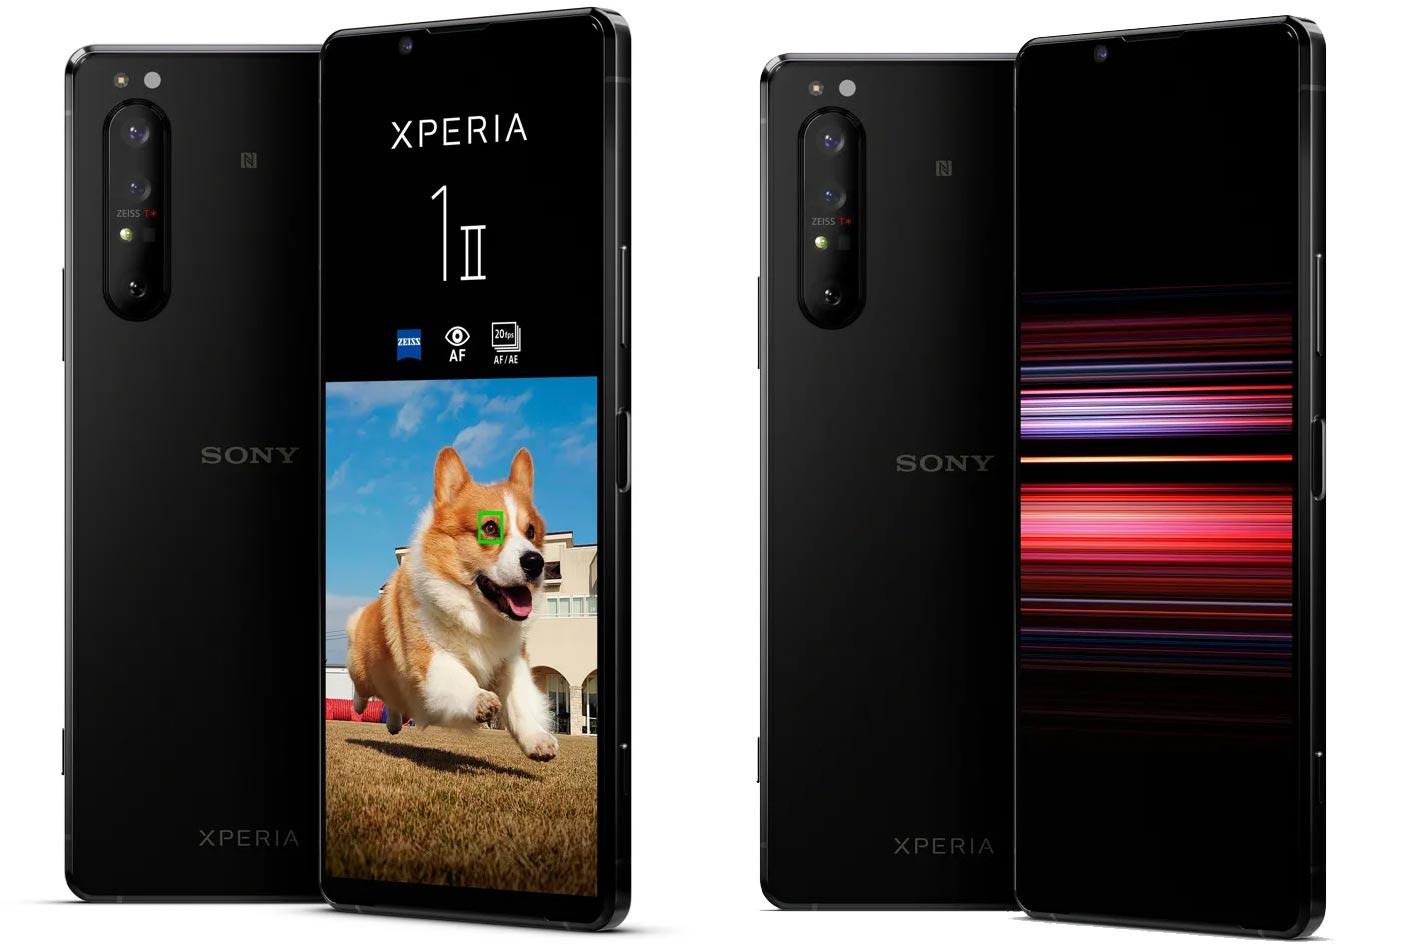 Sony Xperia 1 II: world's first AF/AE continuous tracking smartphone ships in July